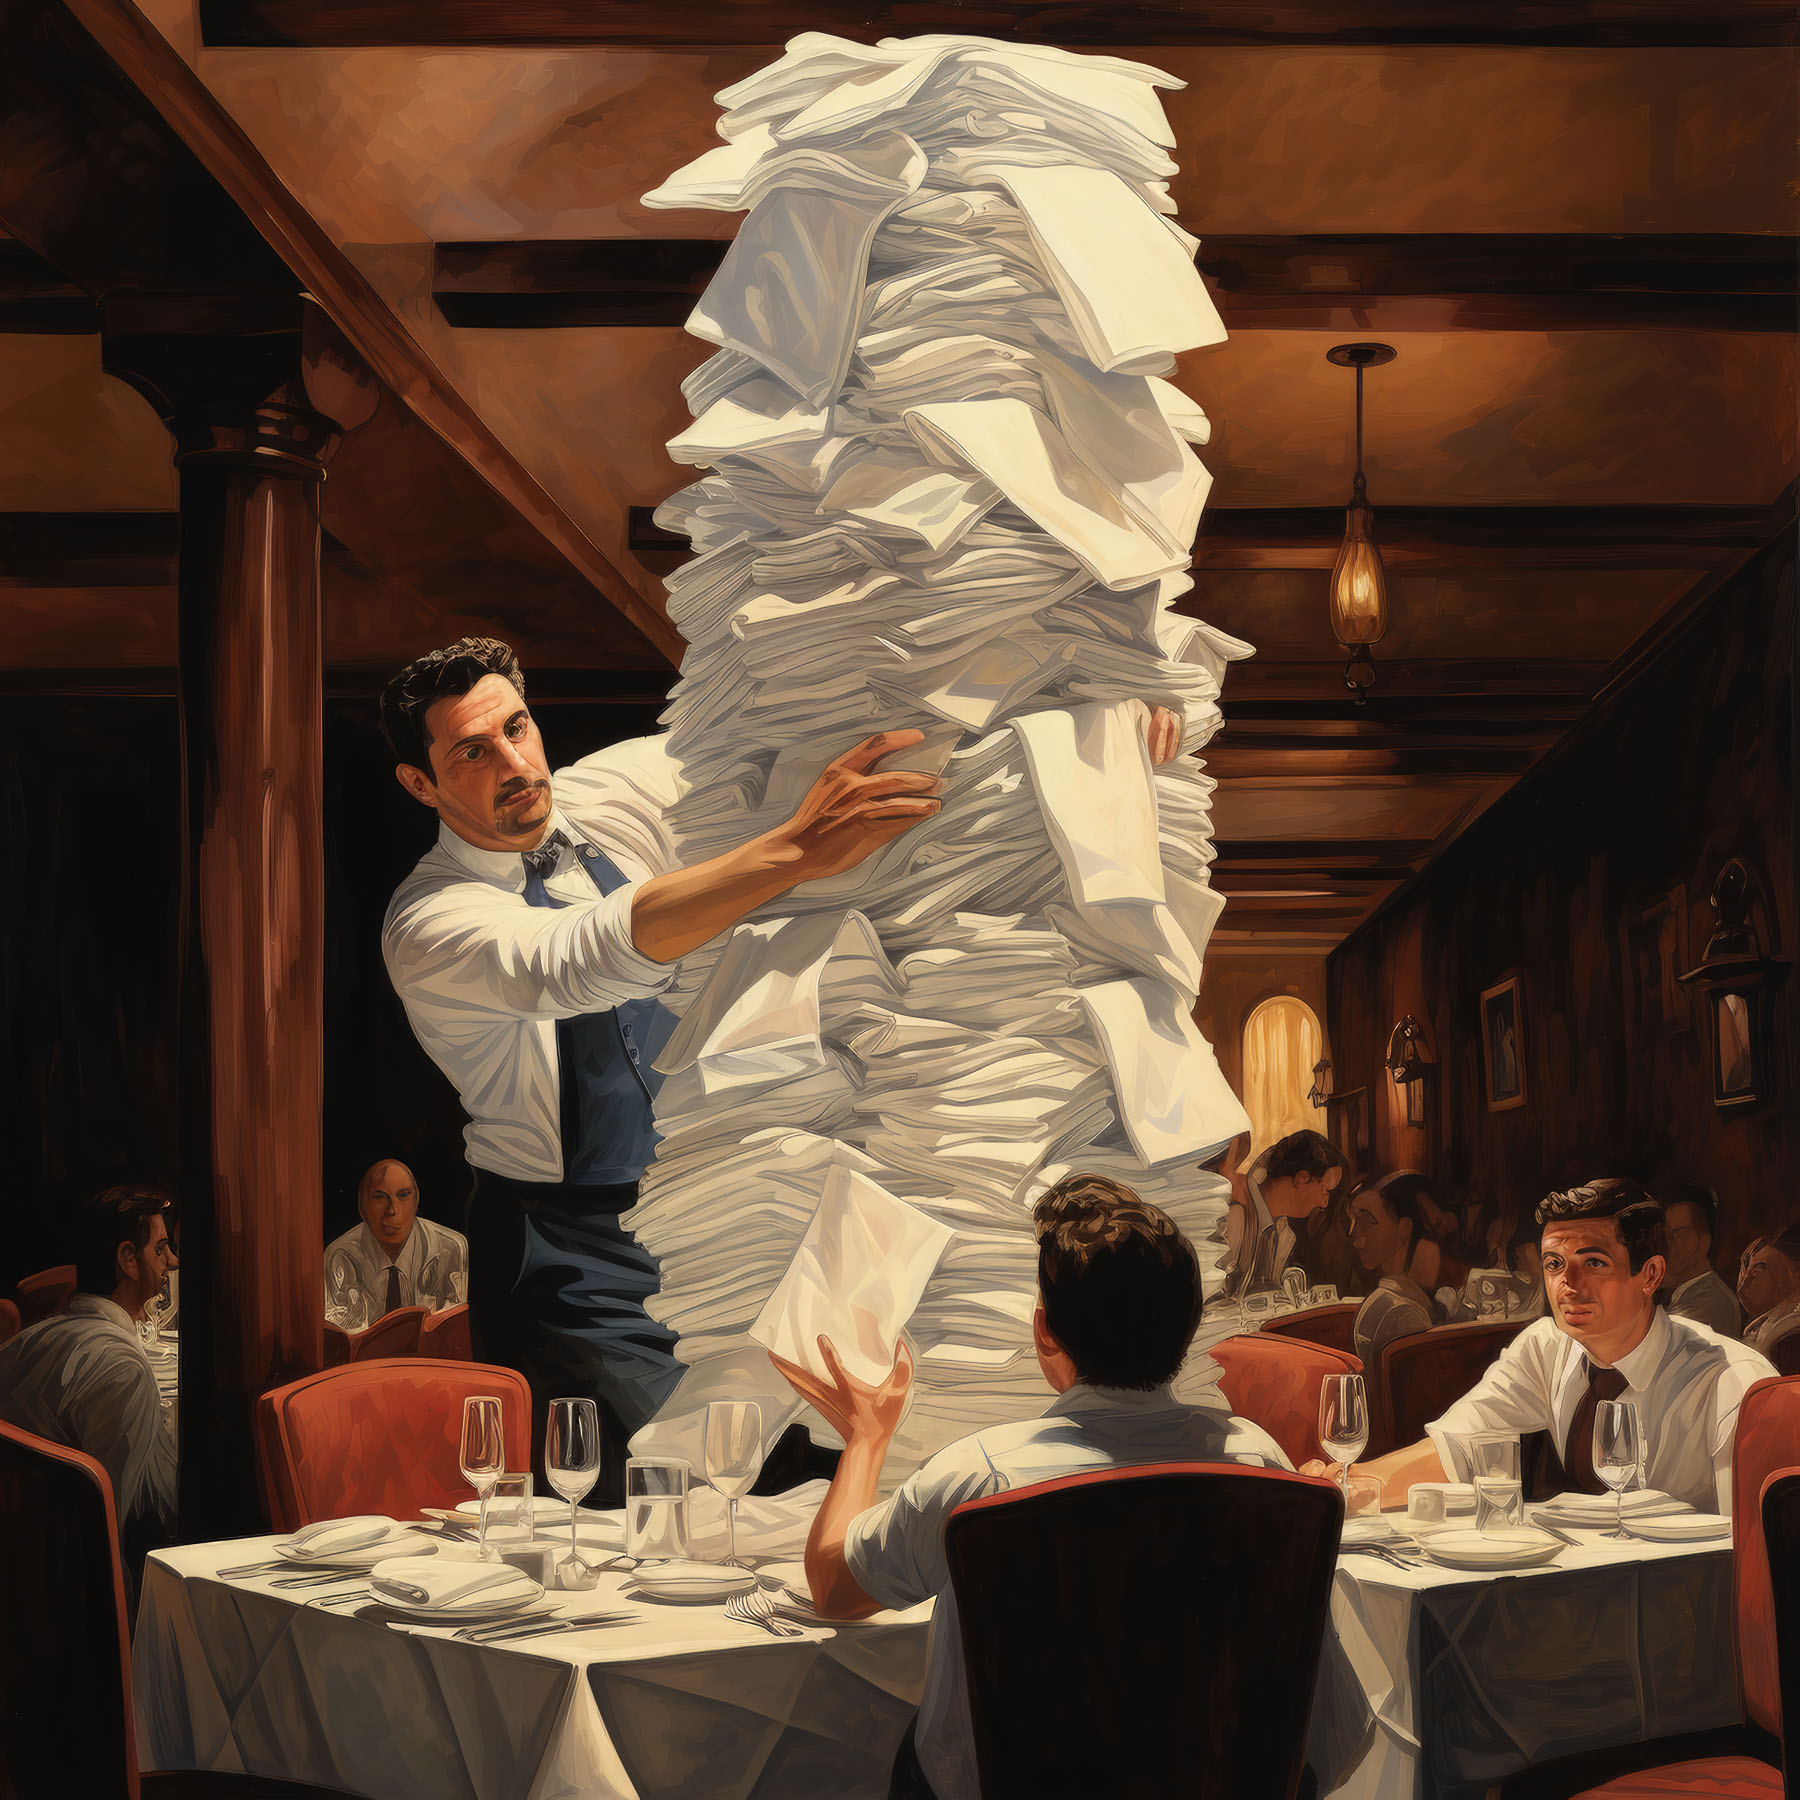 A waiter in a restaurant holds a colossal stack of napkins for a man sitting at his table of empty wine glasses and arranged silverware.